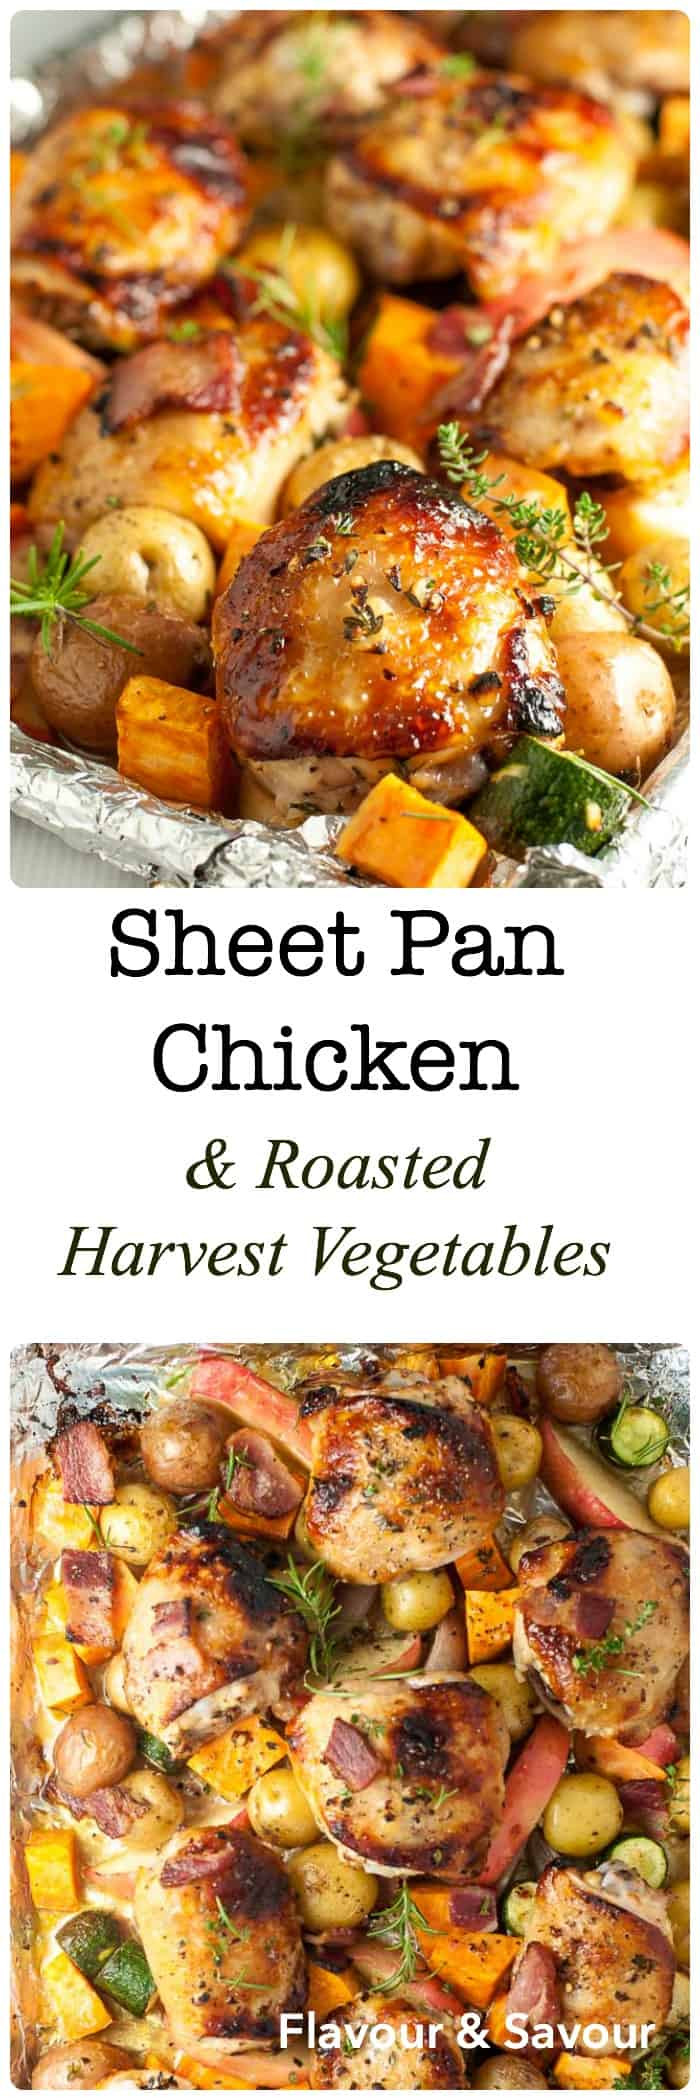 Sheet Pan Chicken Thighs And Veggies
 Sheet Pan Chicken and Roasted Harvest Ve ables Flavour